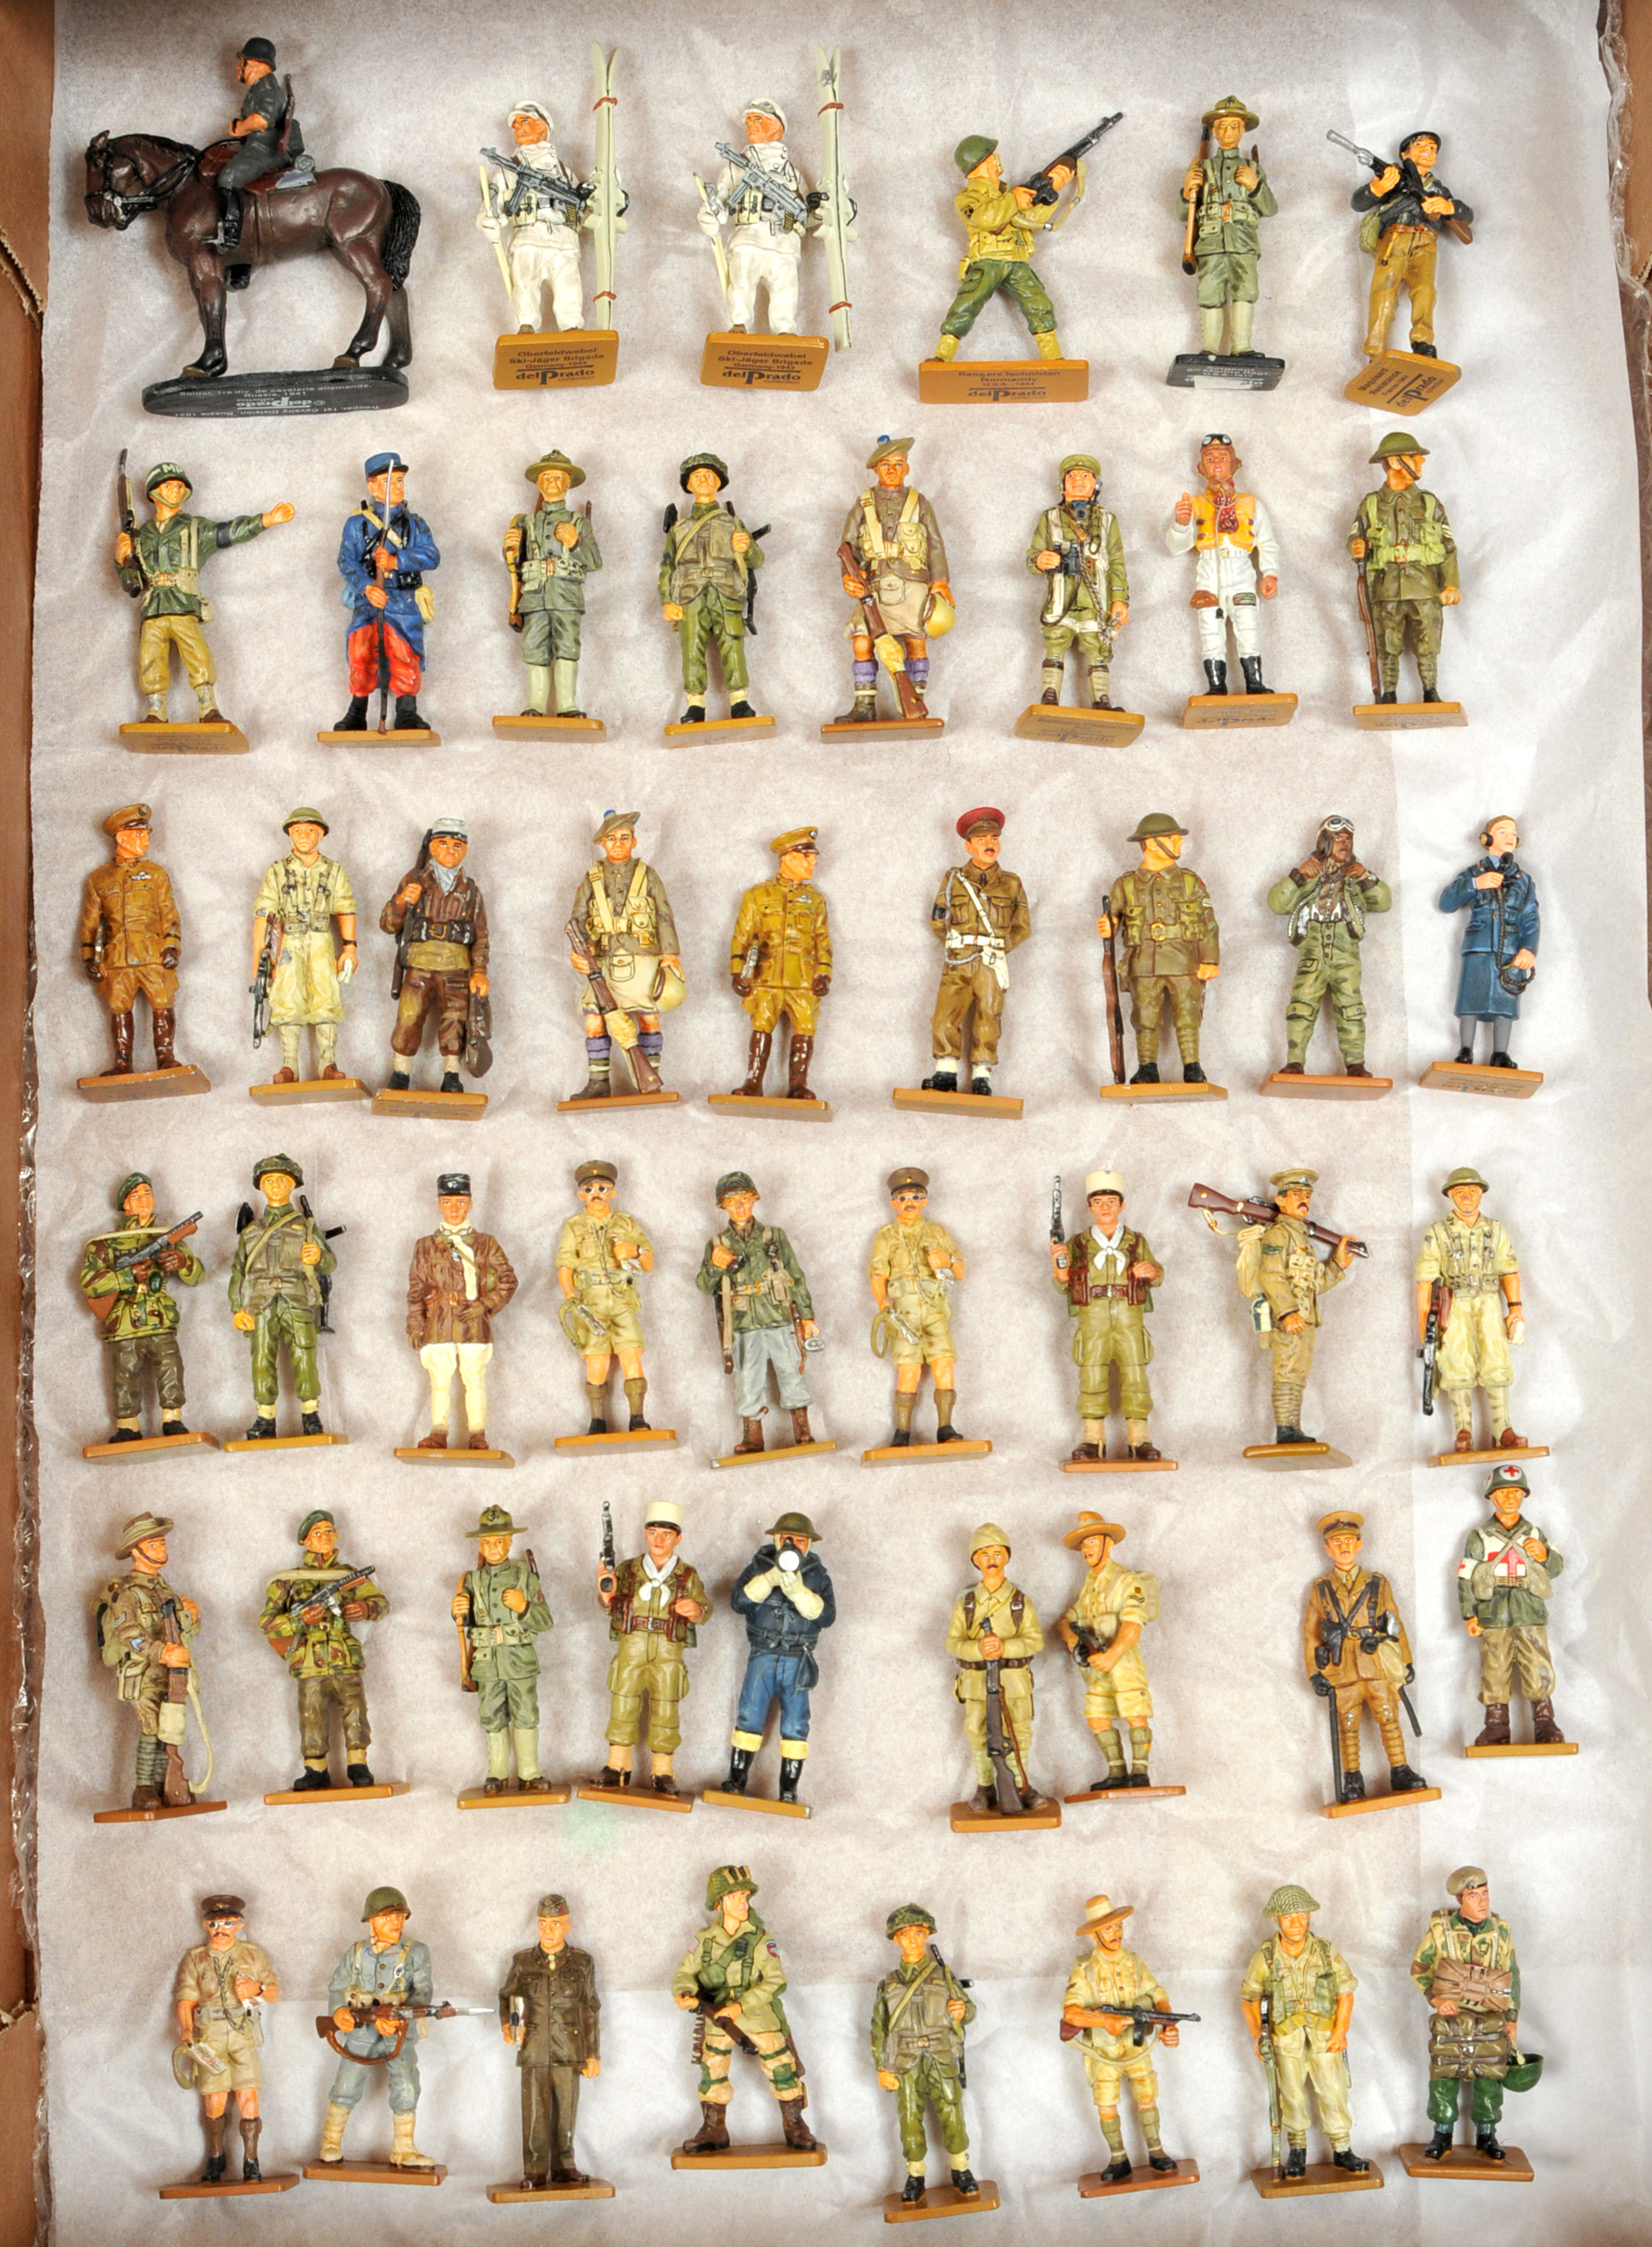 Del Prado Figures - 'Men at War' & 'Firefighters of the World' Series, Unboxed - Image 3 of 3